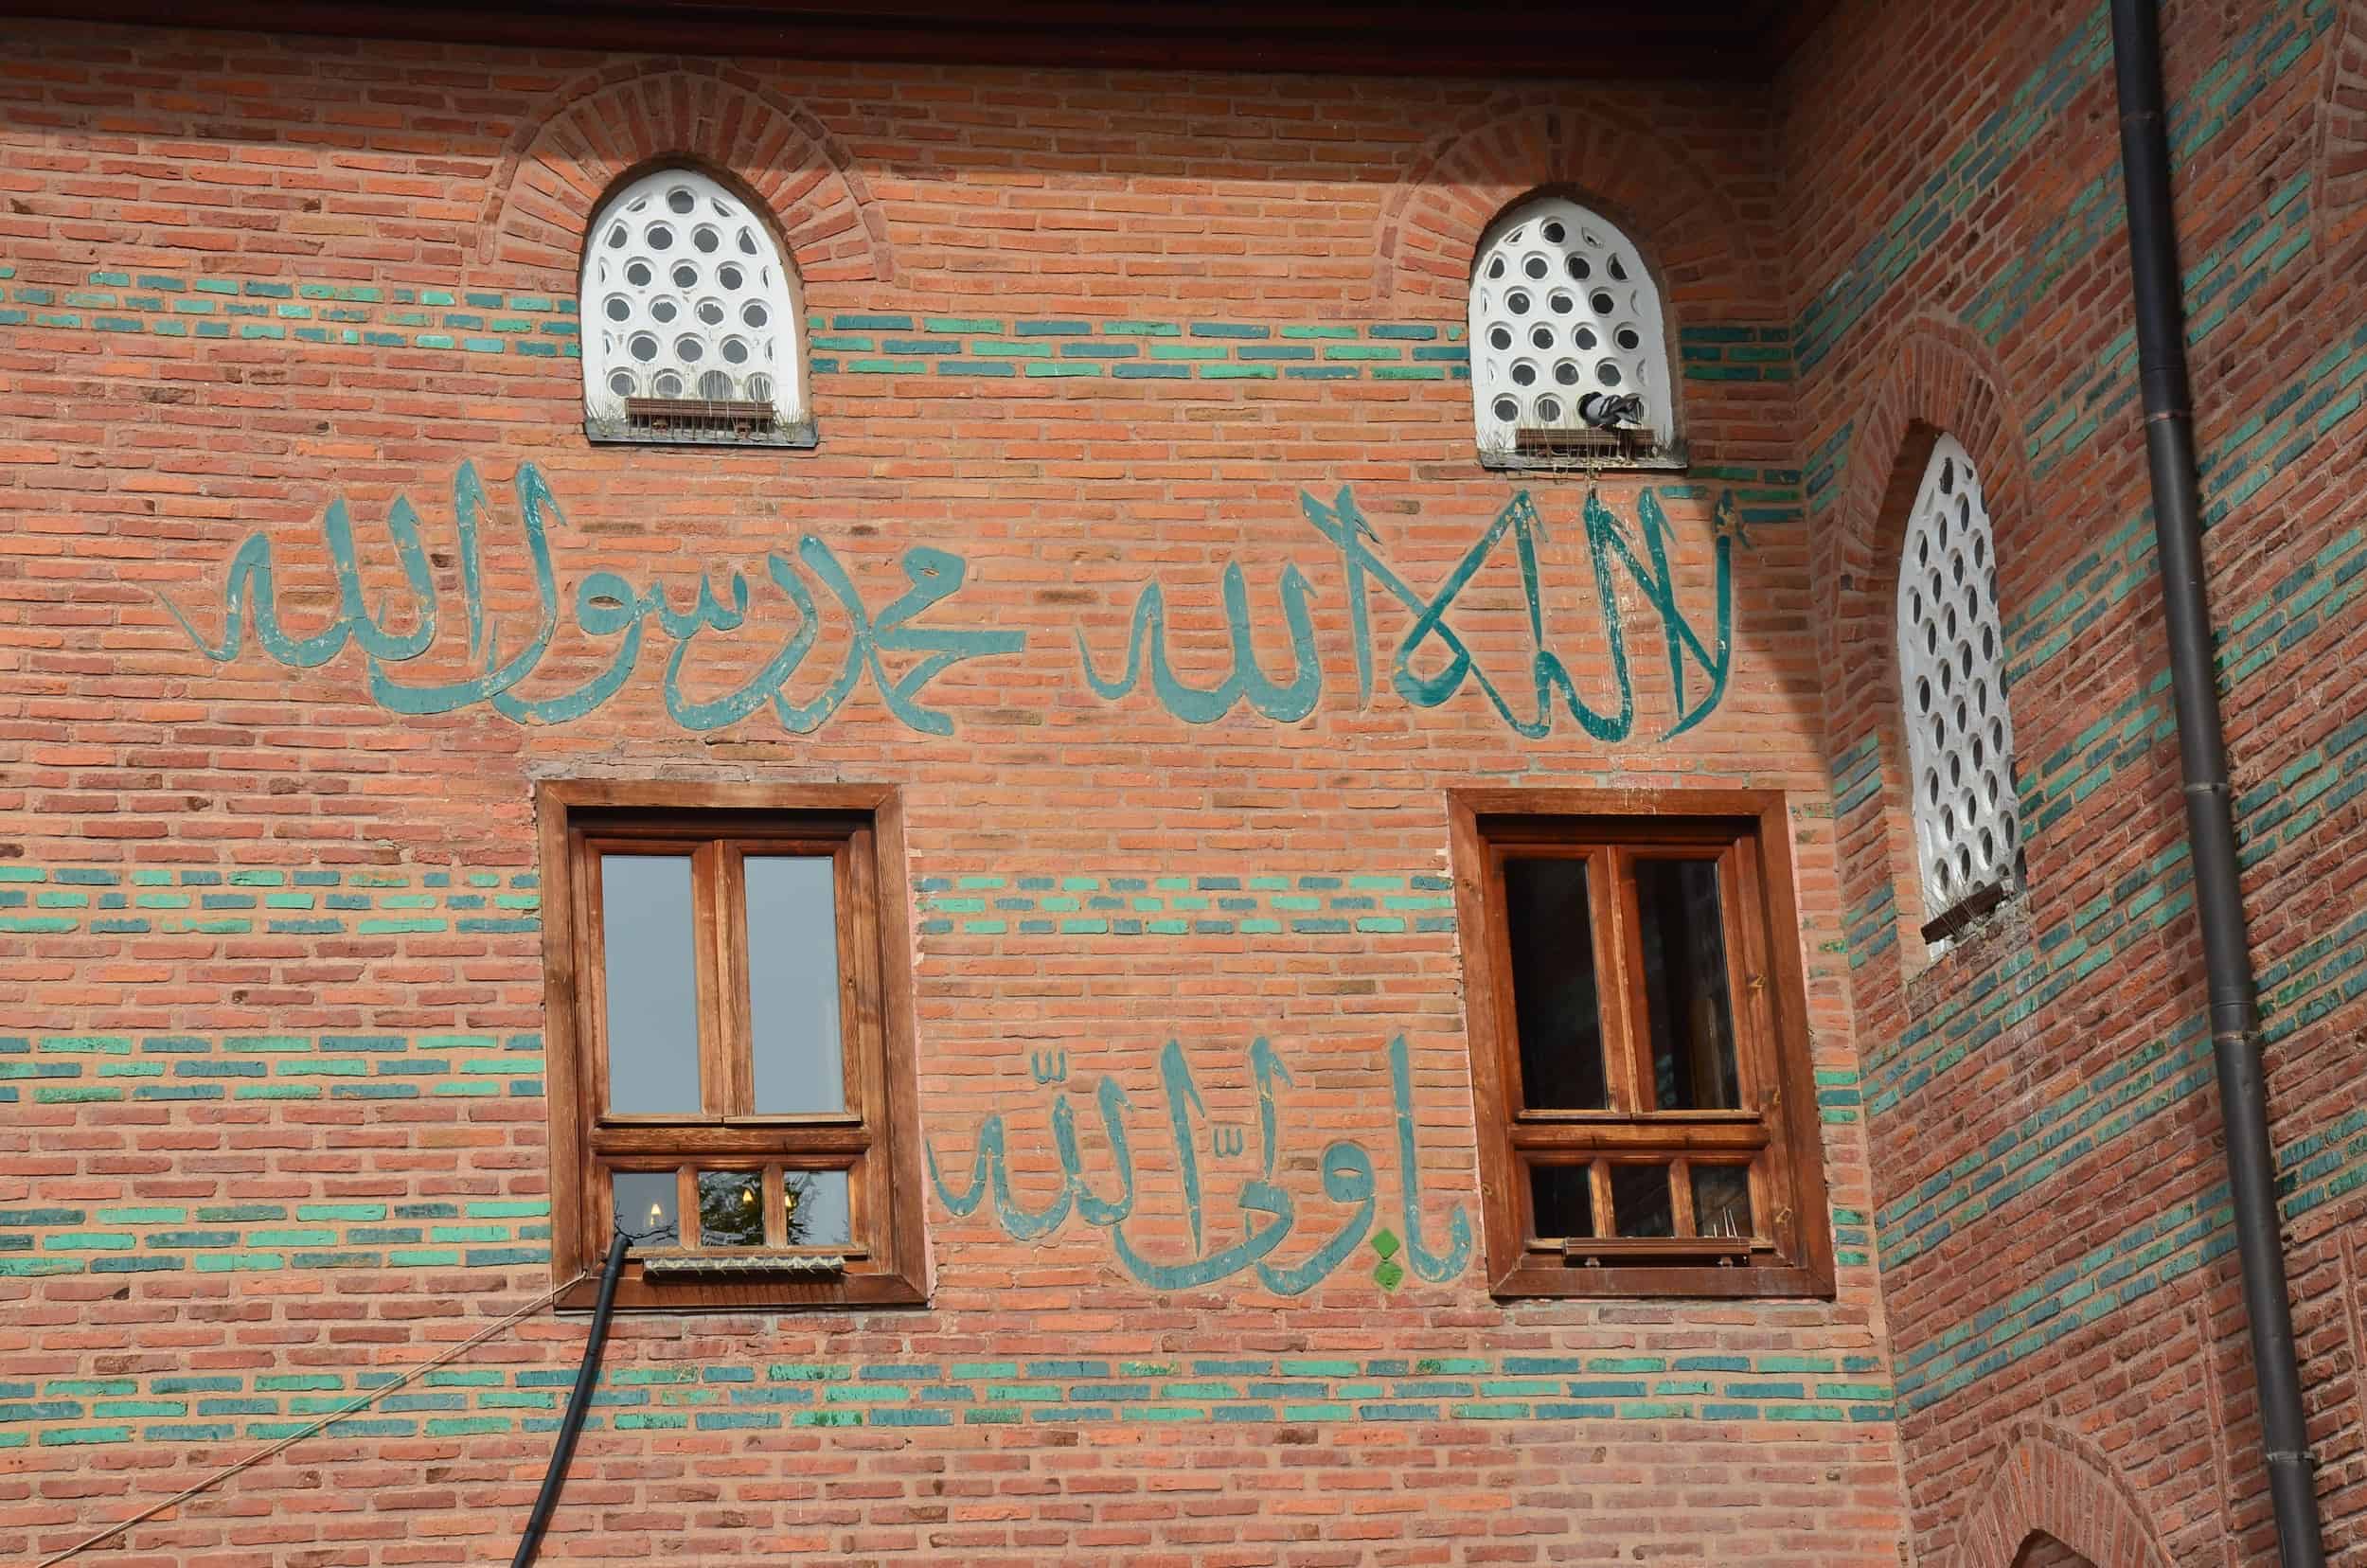 Calligraphy on the exterior at the Hacı Bayram Mosque in Ulus, Ankara, Turkey